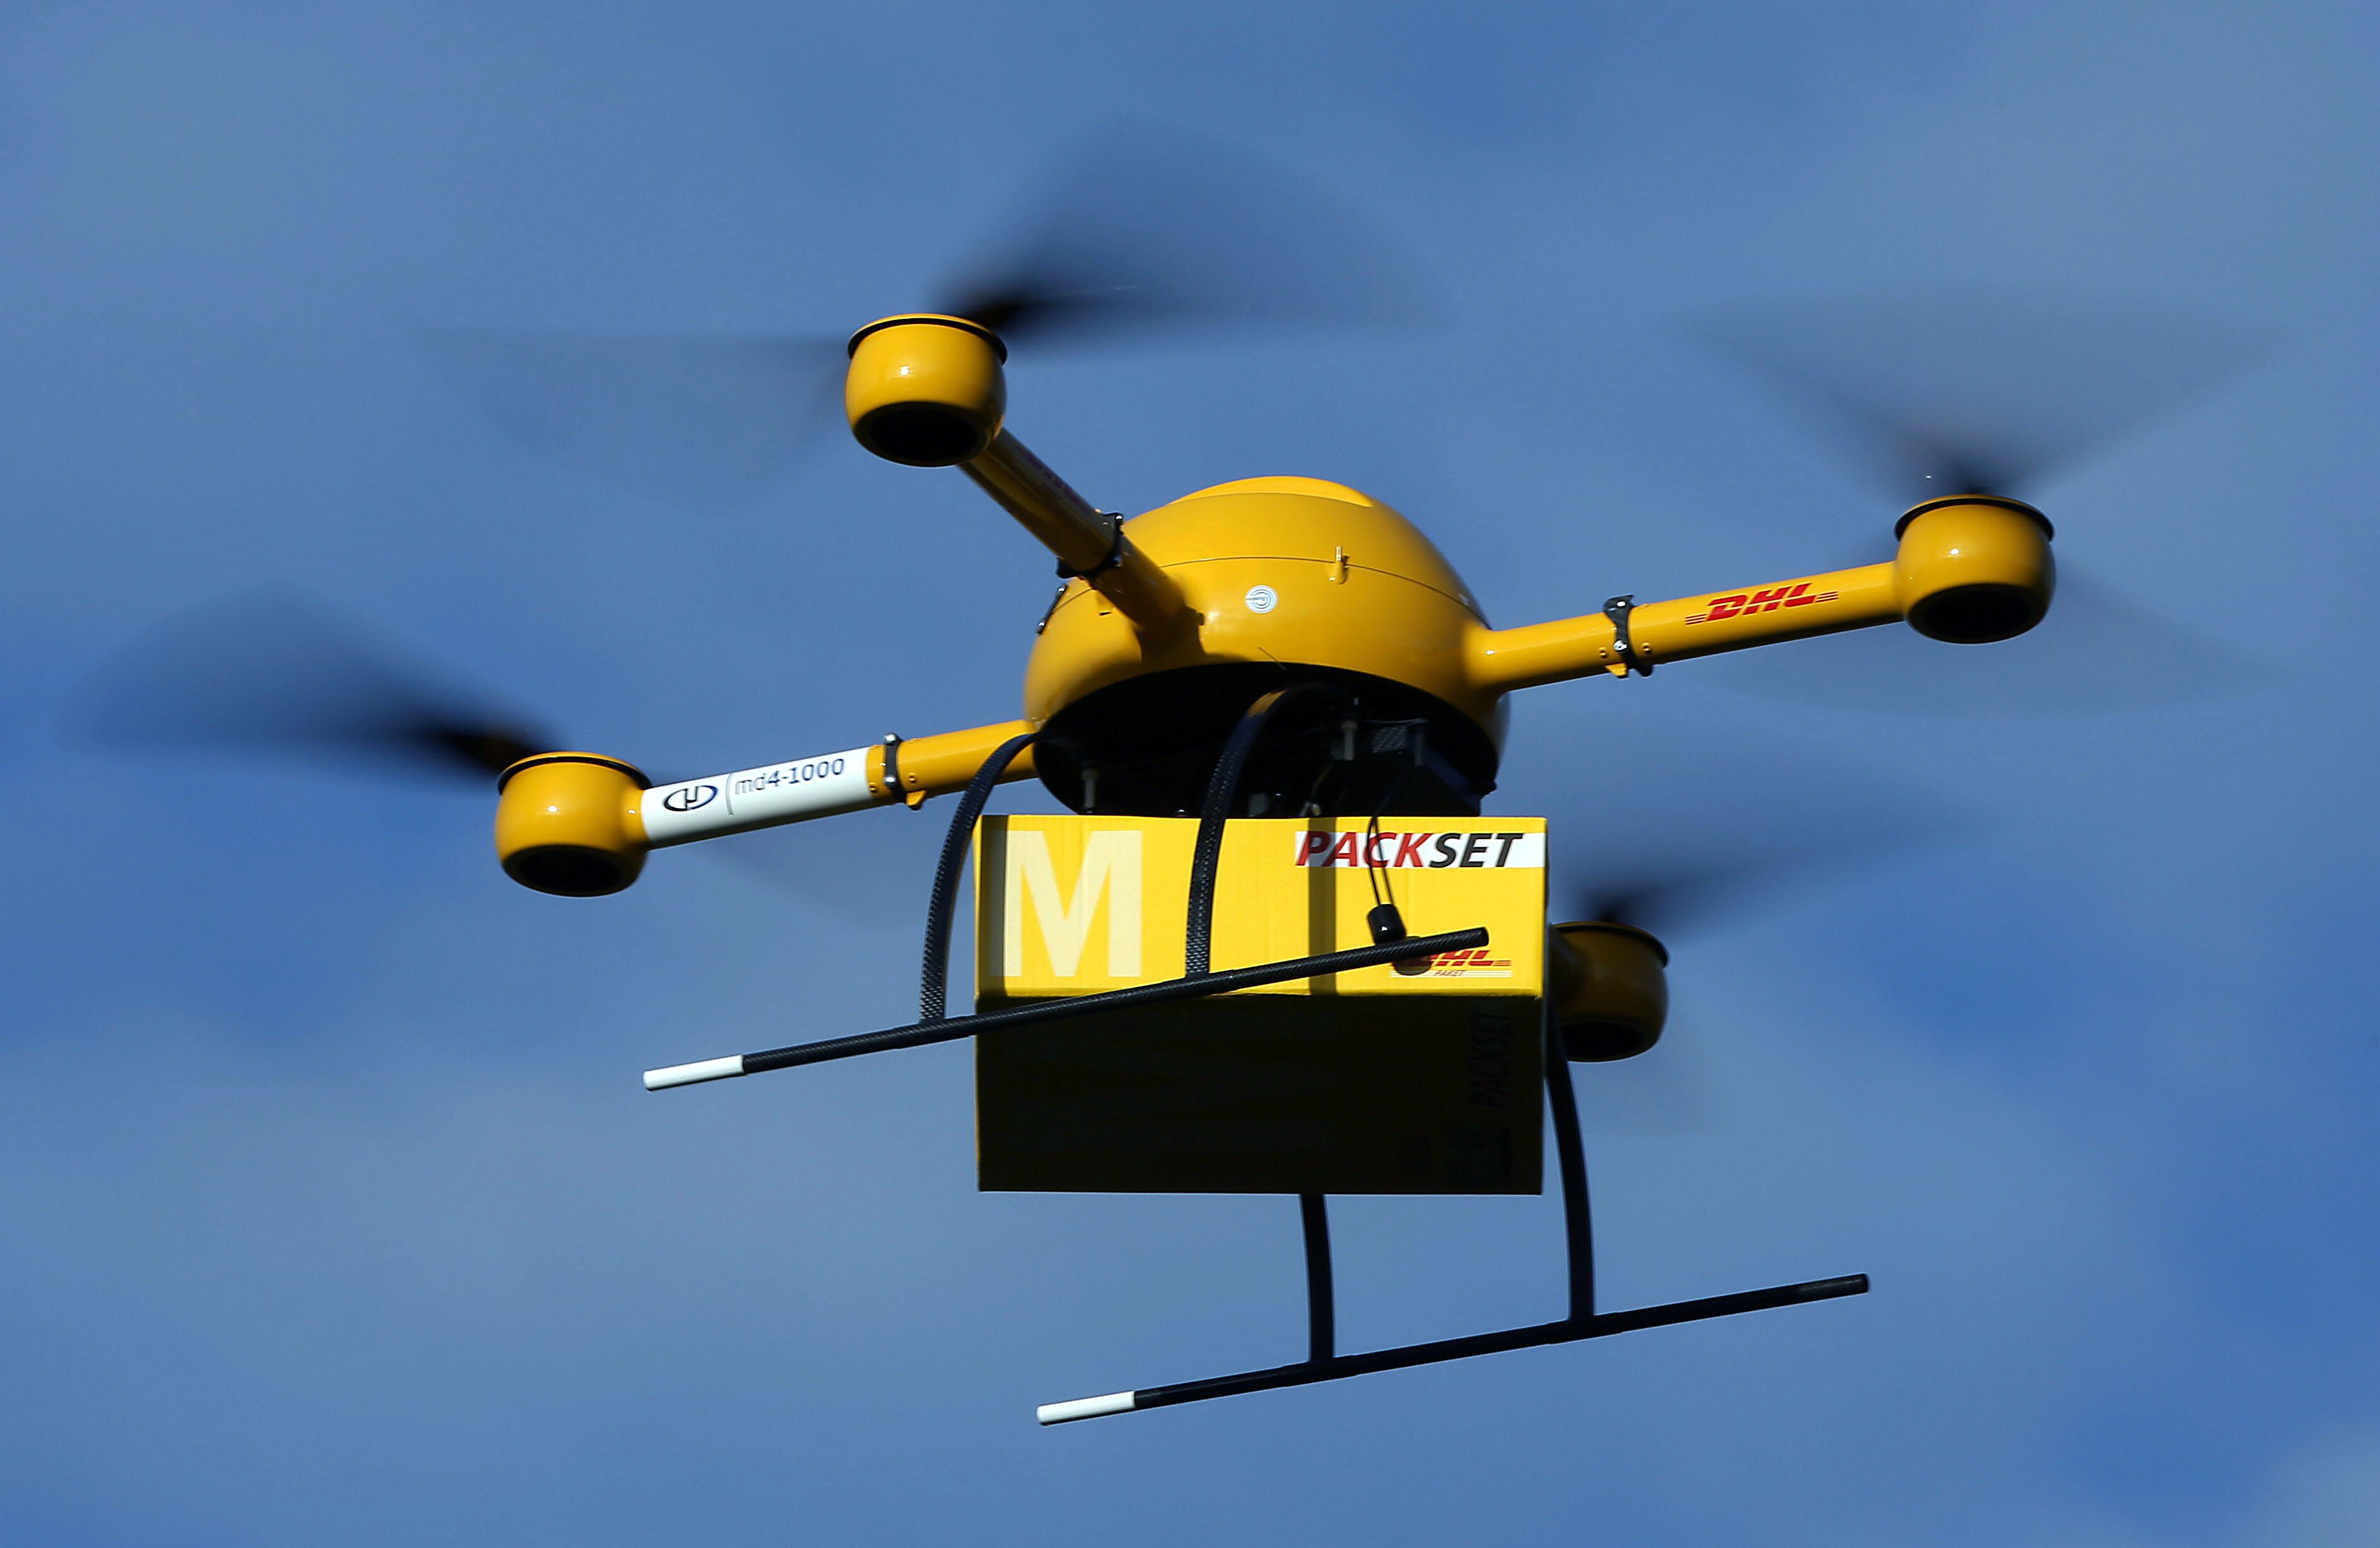 An unmanned aerial vehicle (UAV) carries a parcel in Bonn, Germany, 09 December 2013. Deutsche Post DHL has for the first time tested parcel deliveries with a drone. Photo by: Oliver Berg/picture-alliance/dpa/AP Images